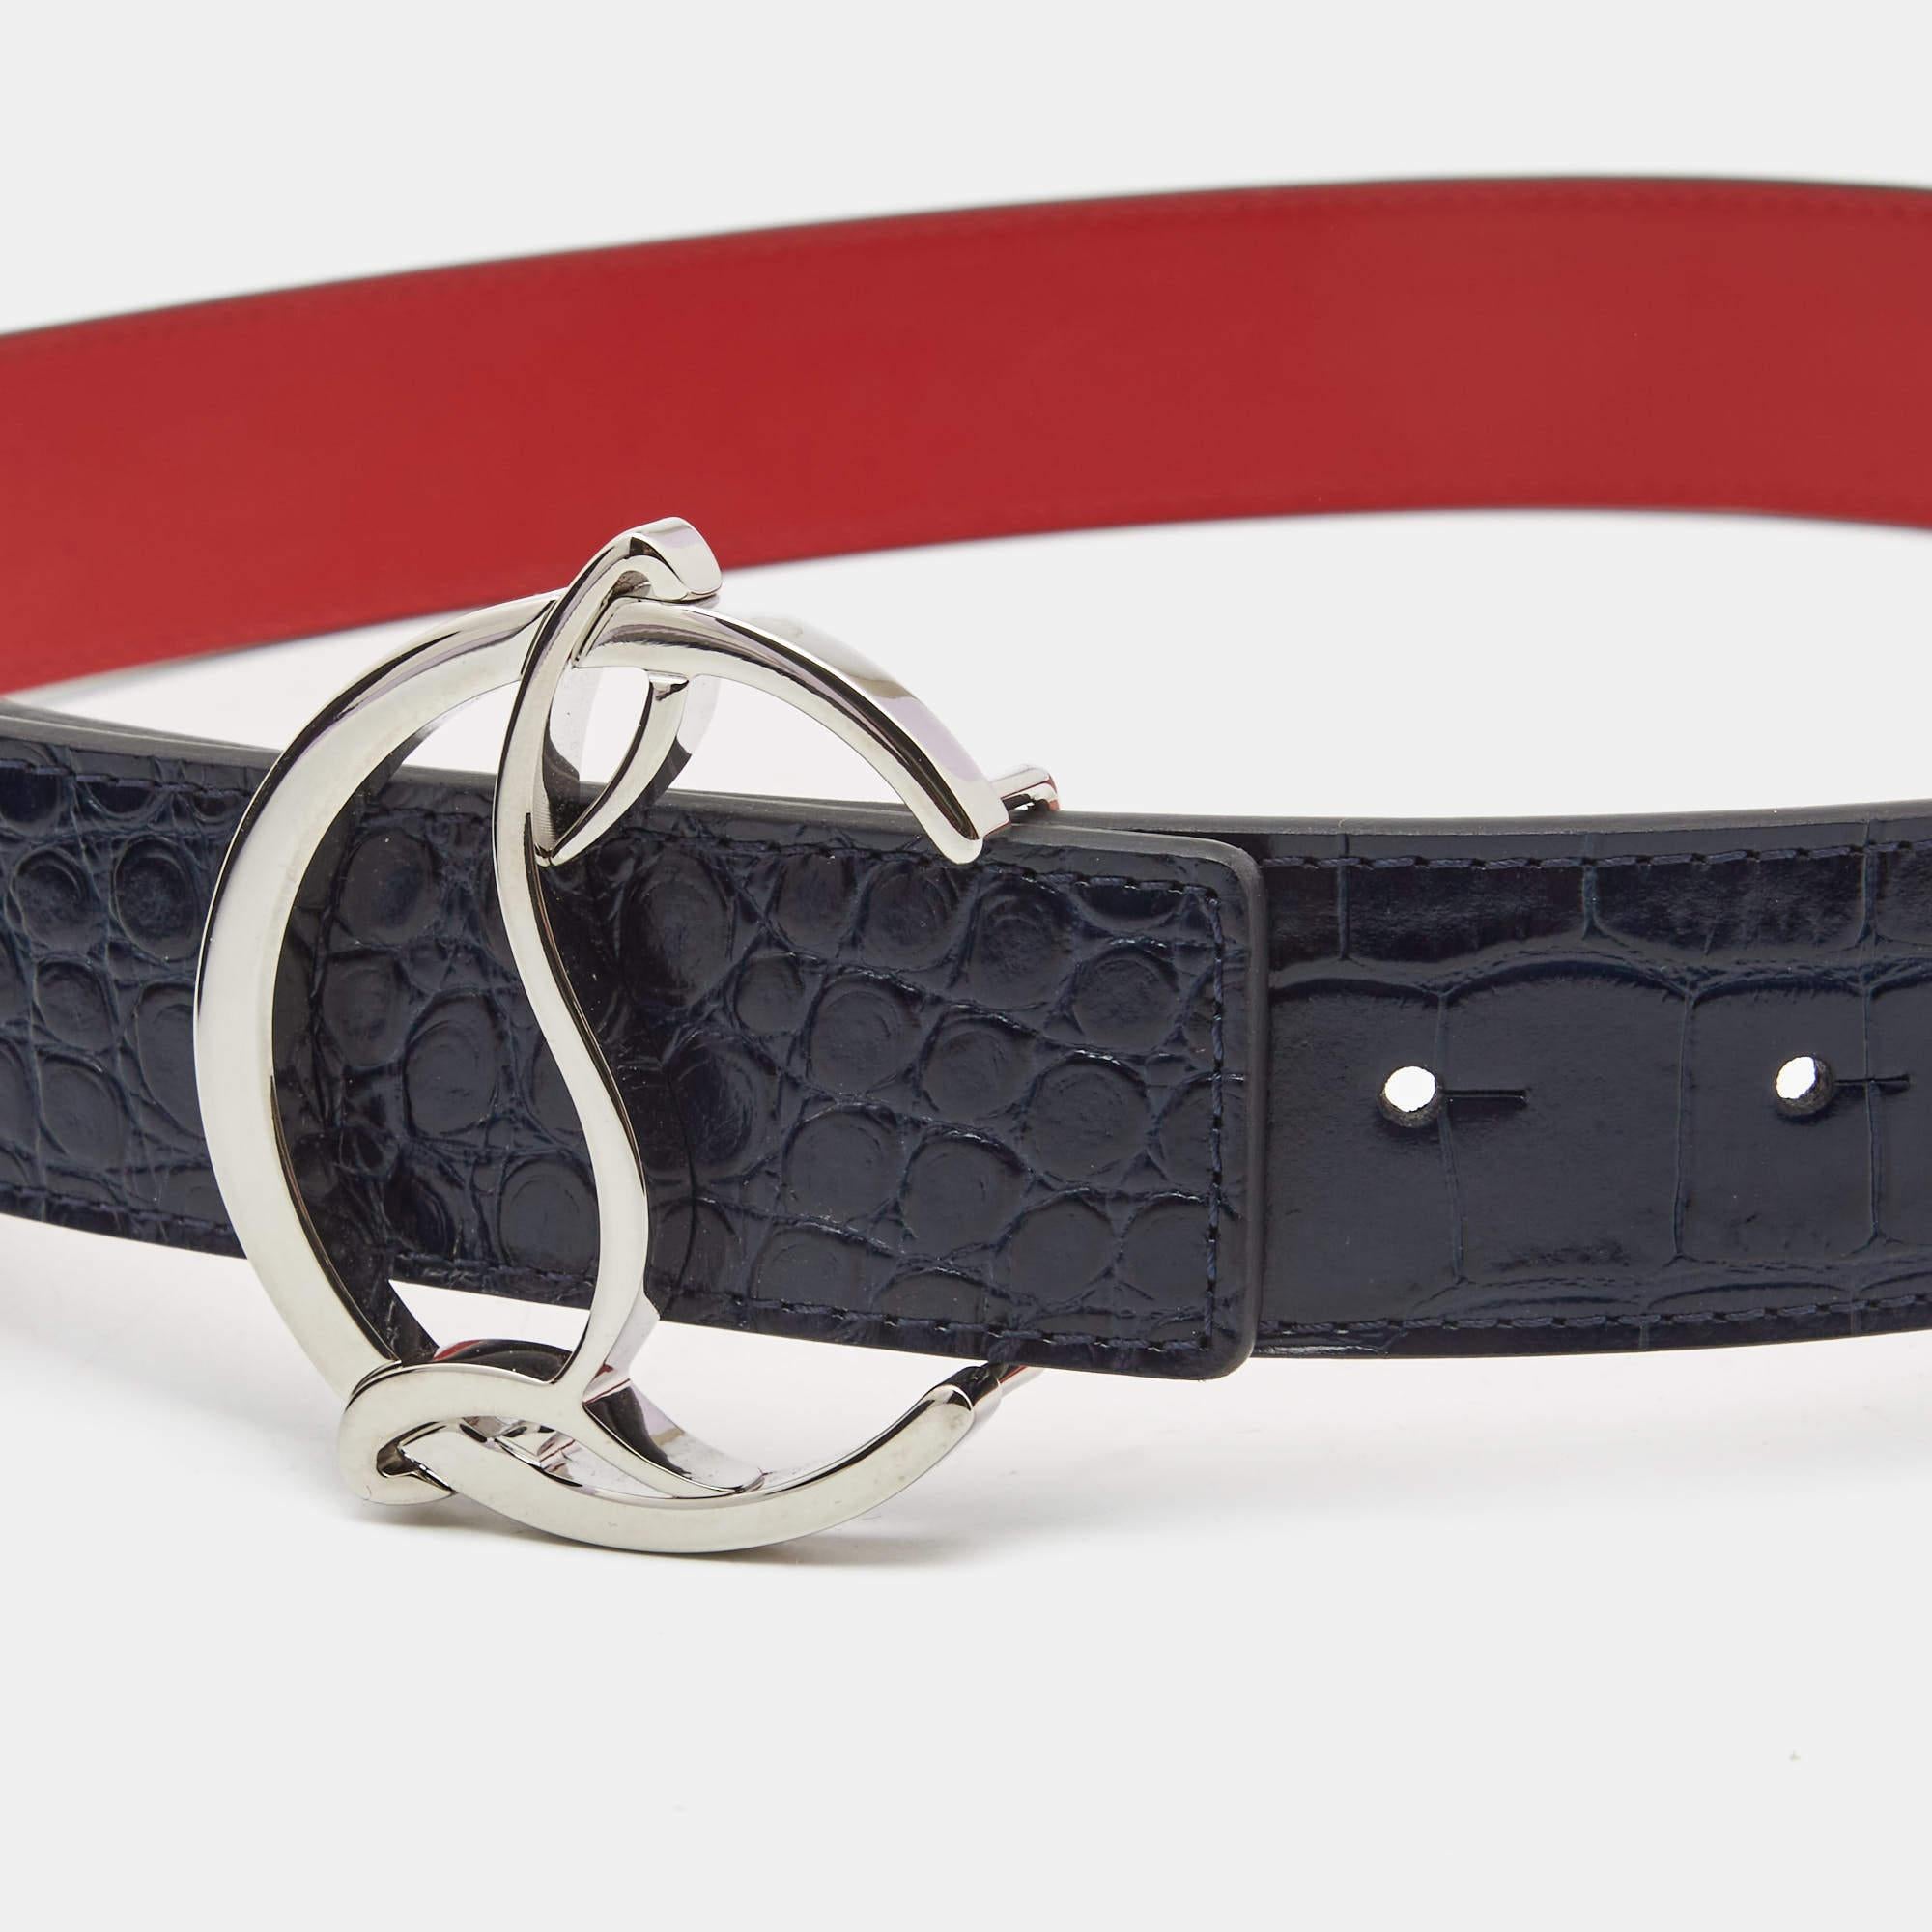 A classic add-on to your collection of belts is this Christian Louboutin piece. Cut to a convenient length, the belt has a smooth finish and a sturdy built. This wardrobe essential piece will continually complement your style.

